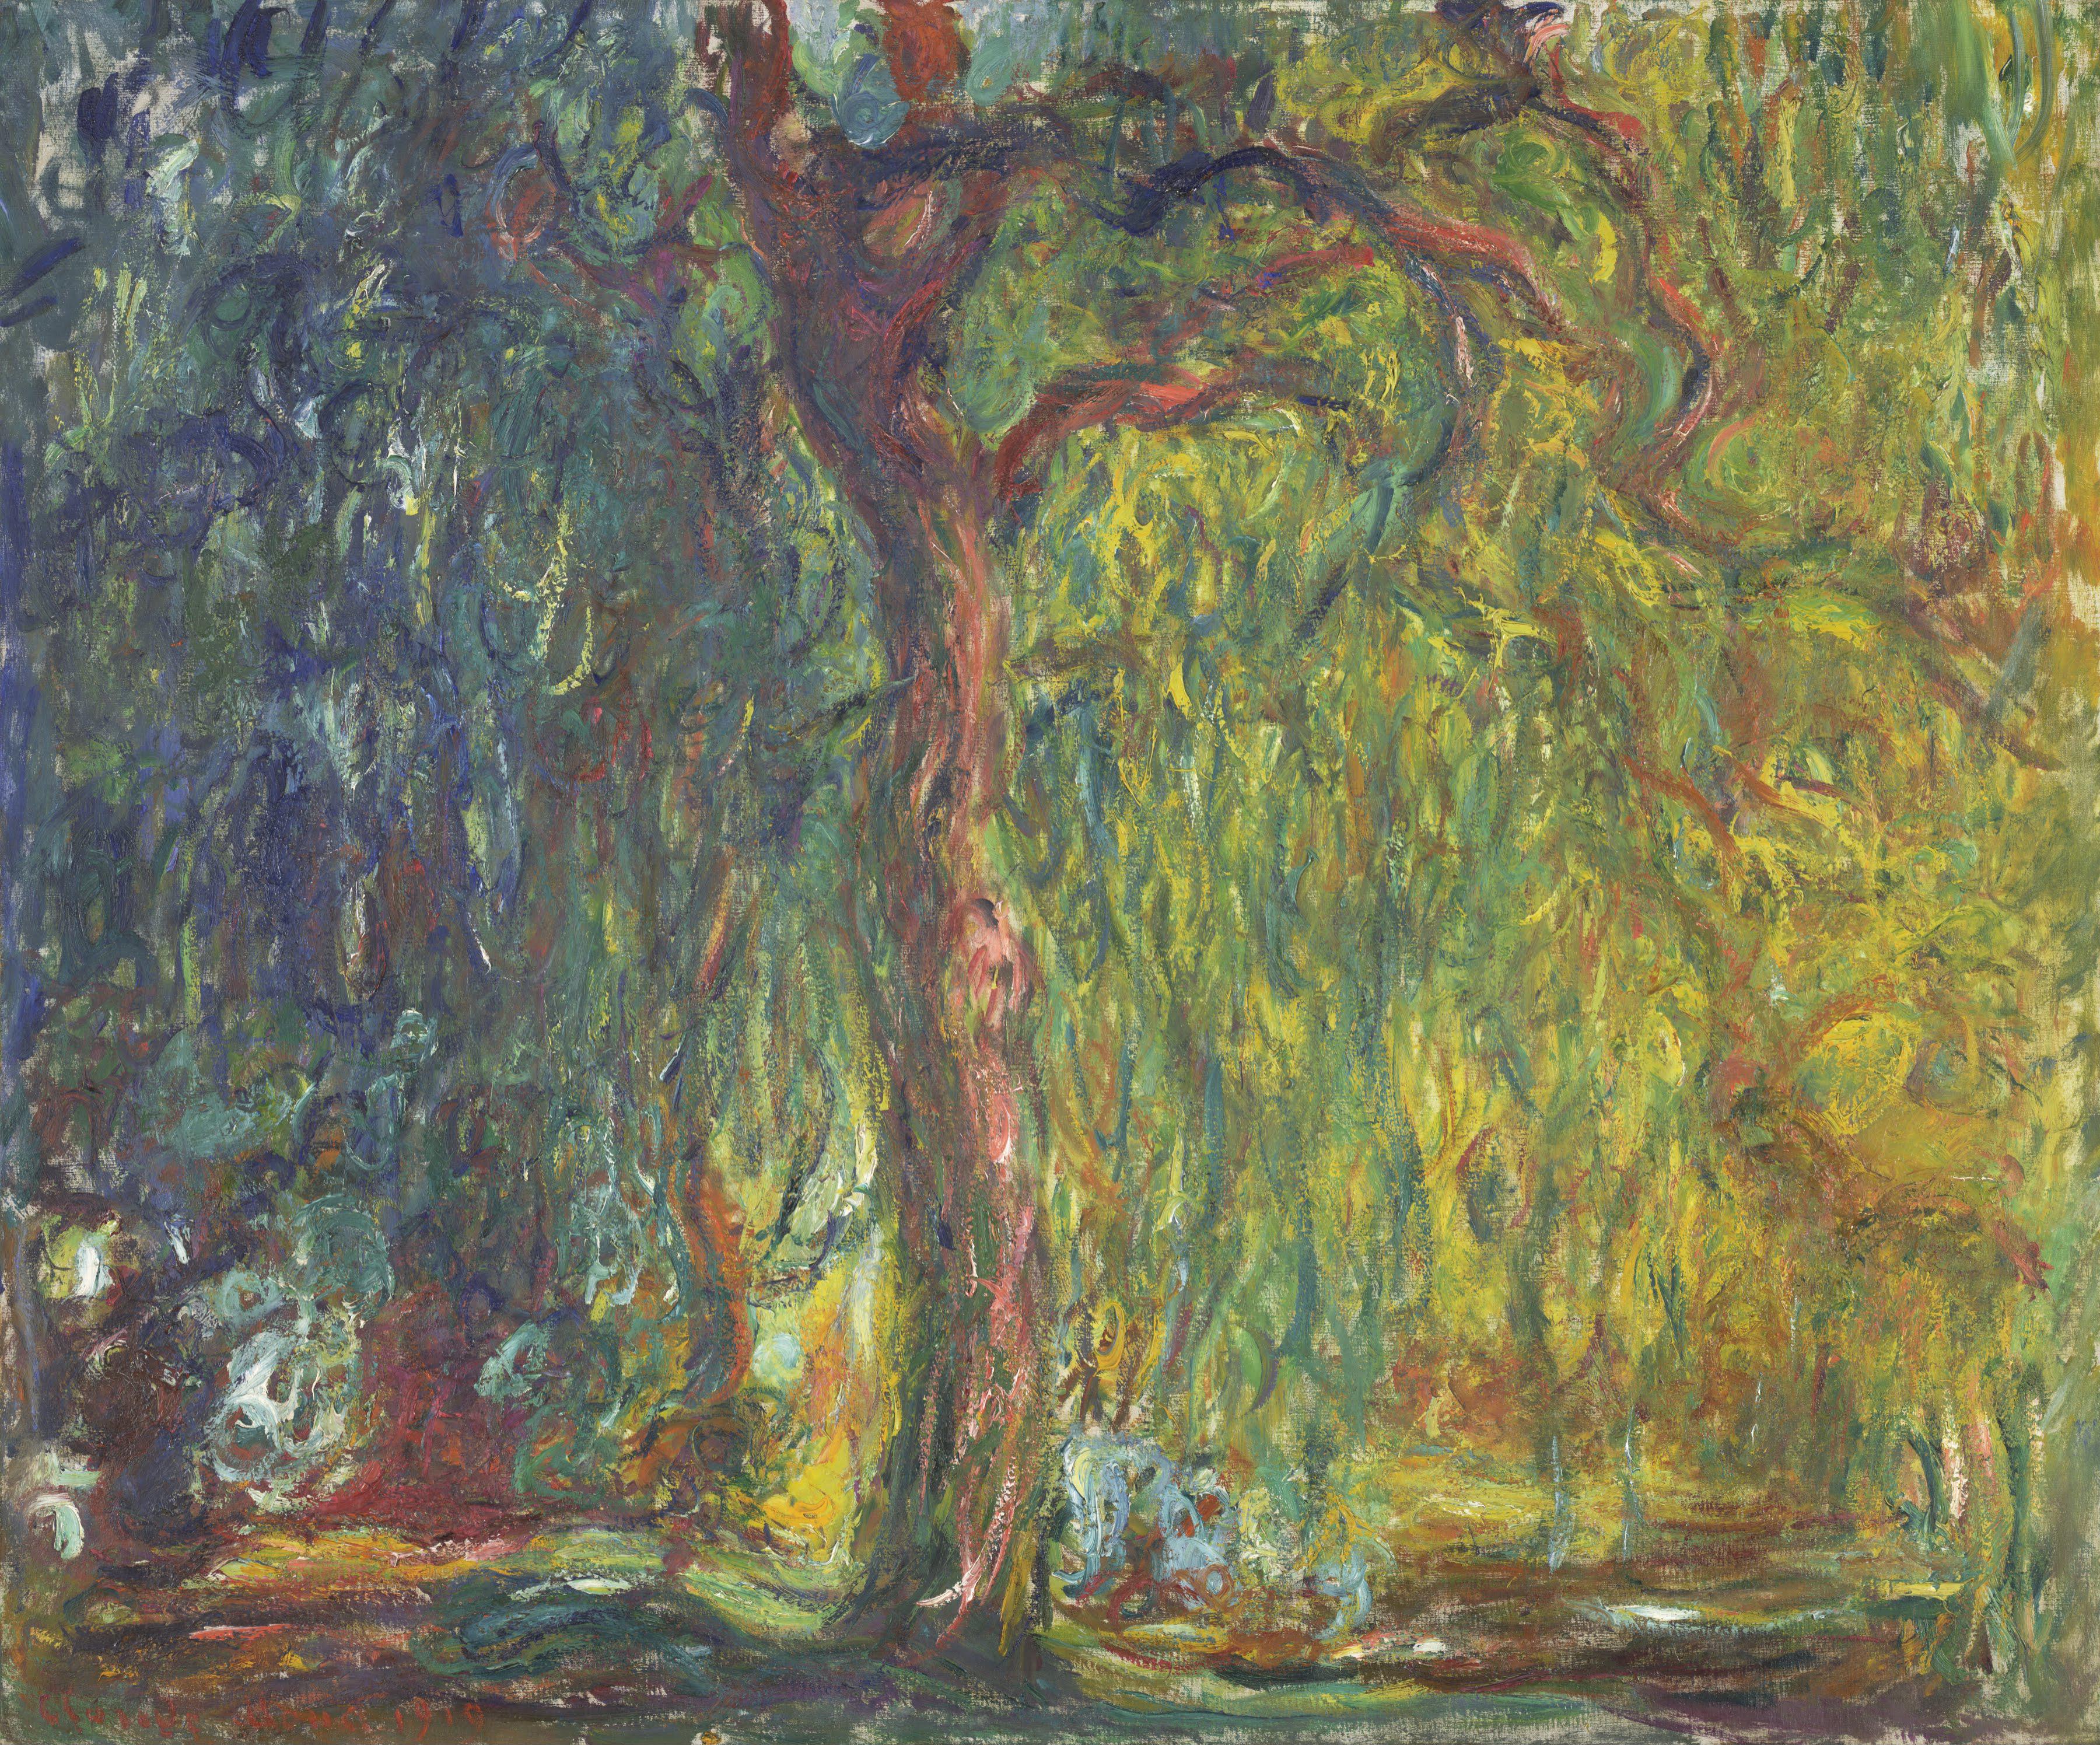 Claude Monet Weeping Willow.jpg. d:Special:EntityPage/Q2450237. d:Special:E...